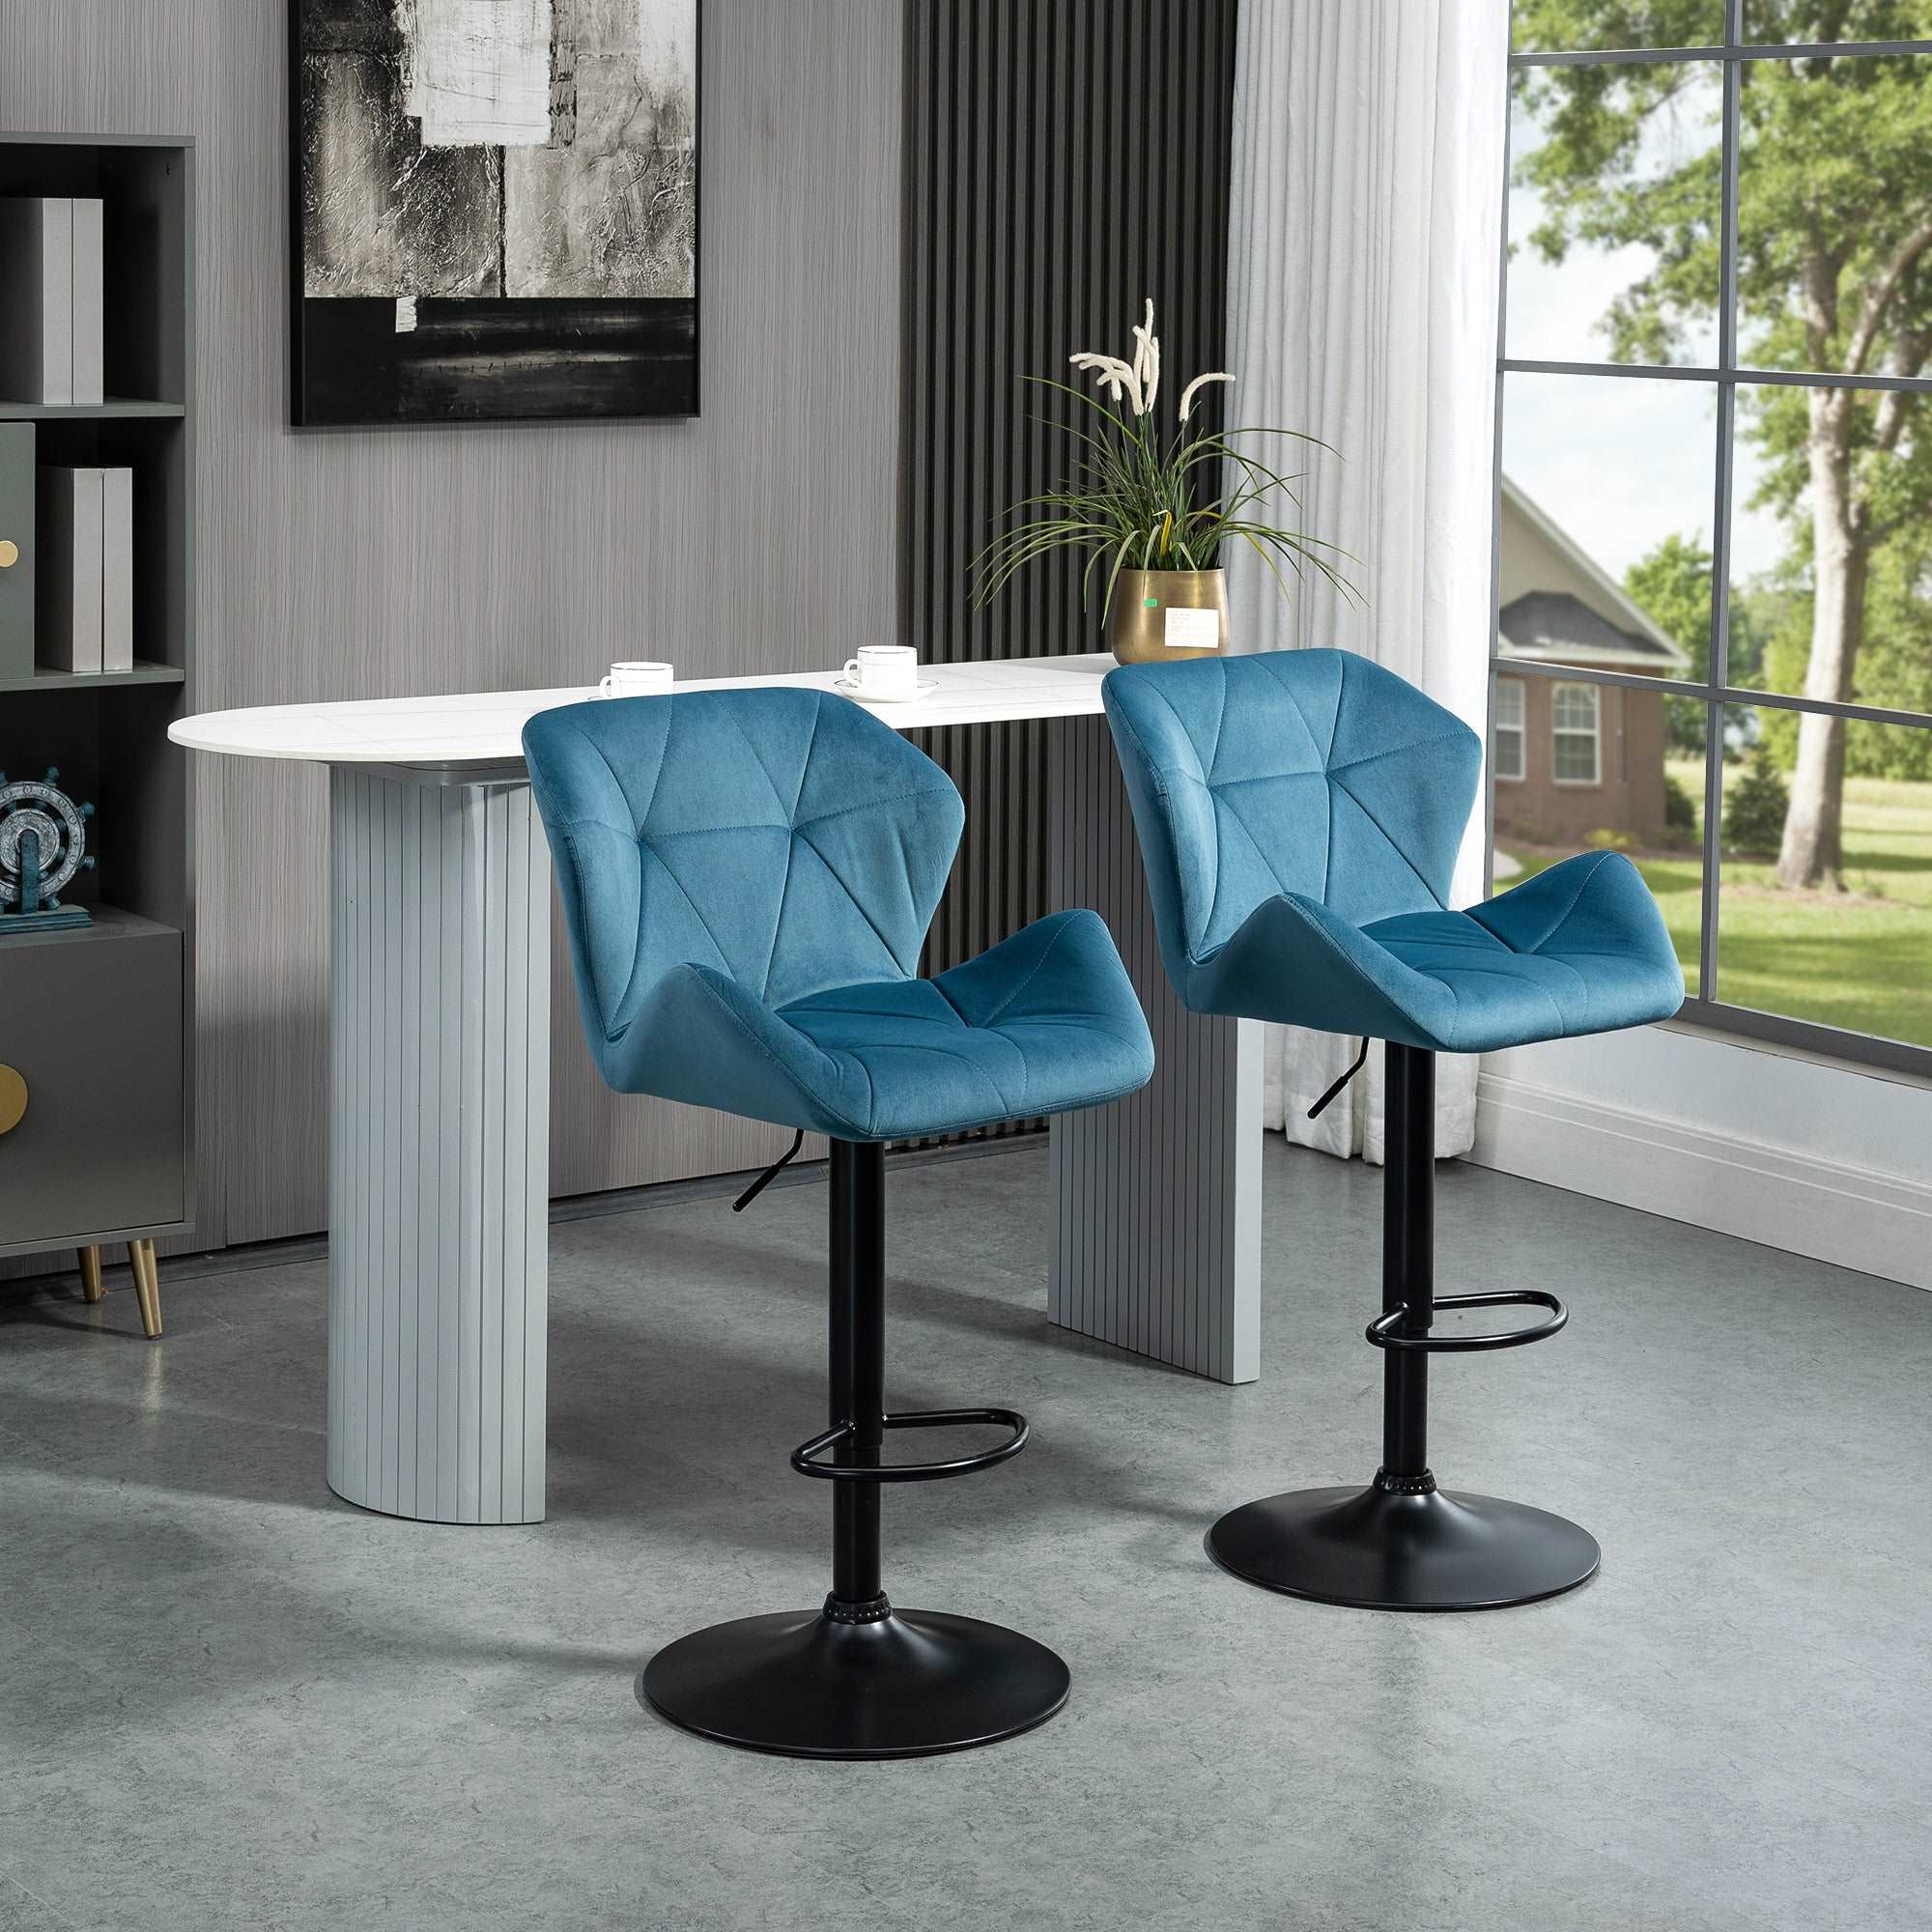 Bar Stools Set Of 2 Luxurious Velvet-Touch Barstools w/ Metal Frame Footrest Round Base Triangle Indenting Moulded Seat Adjustable Height Blue  AOSOM   